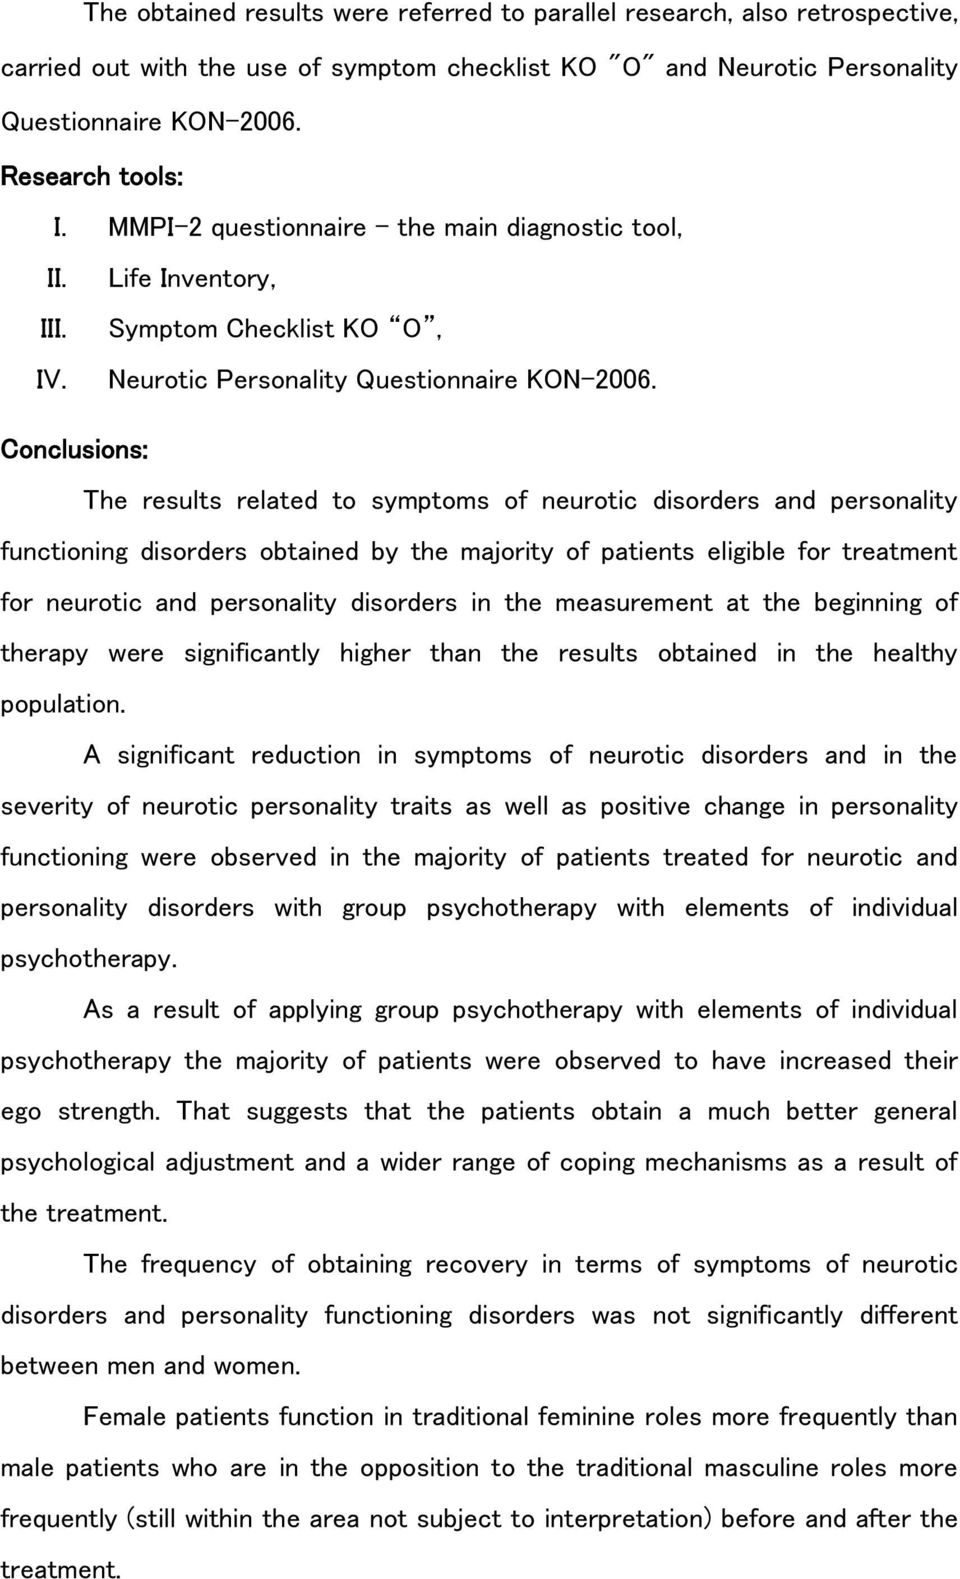 Conclusions: The results related to symptoms of neurotic disorders and personality functioning disorders obtained by the majority of patients eligible for treatment for neurotic and personality